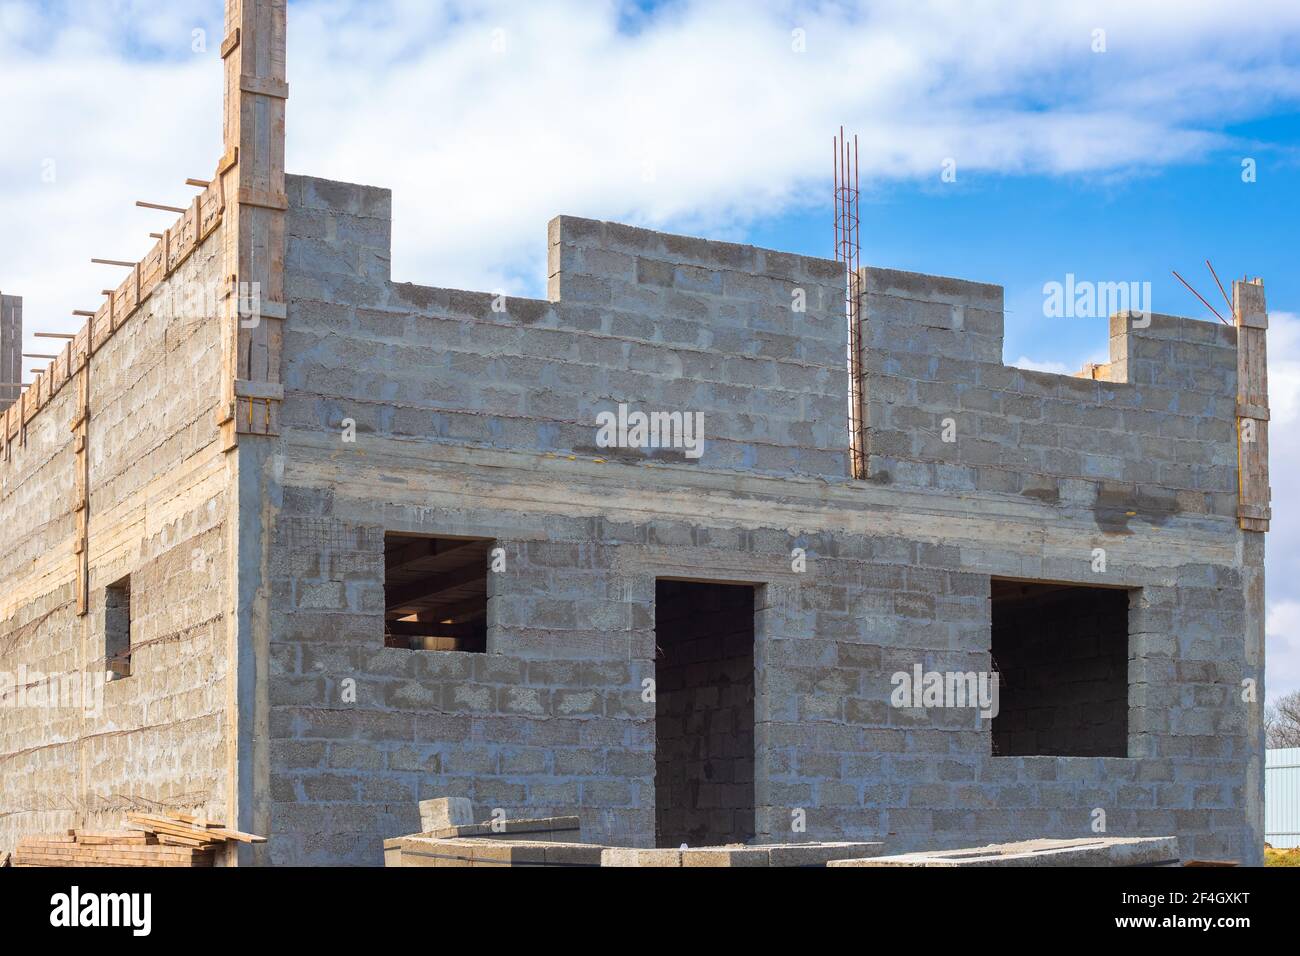 Construction of buildings from cinder block. Construction site of a two-story country house made of gray large blocks of bricks with protruding fittin Stock Photo